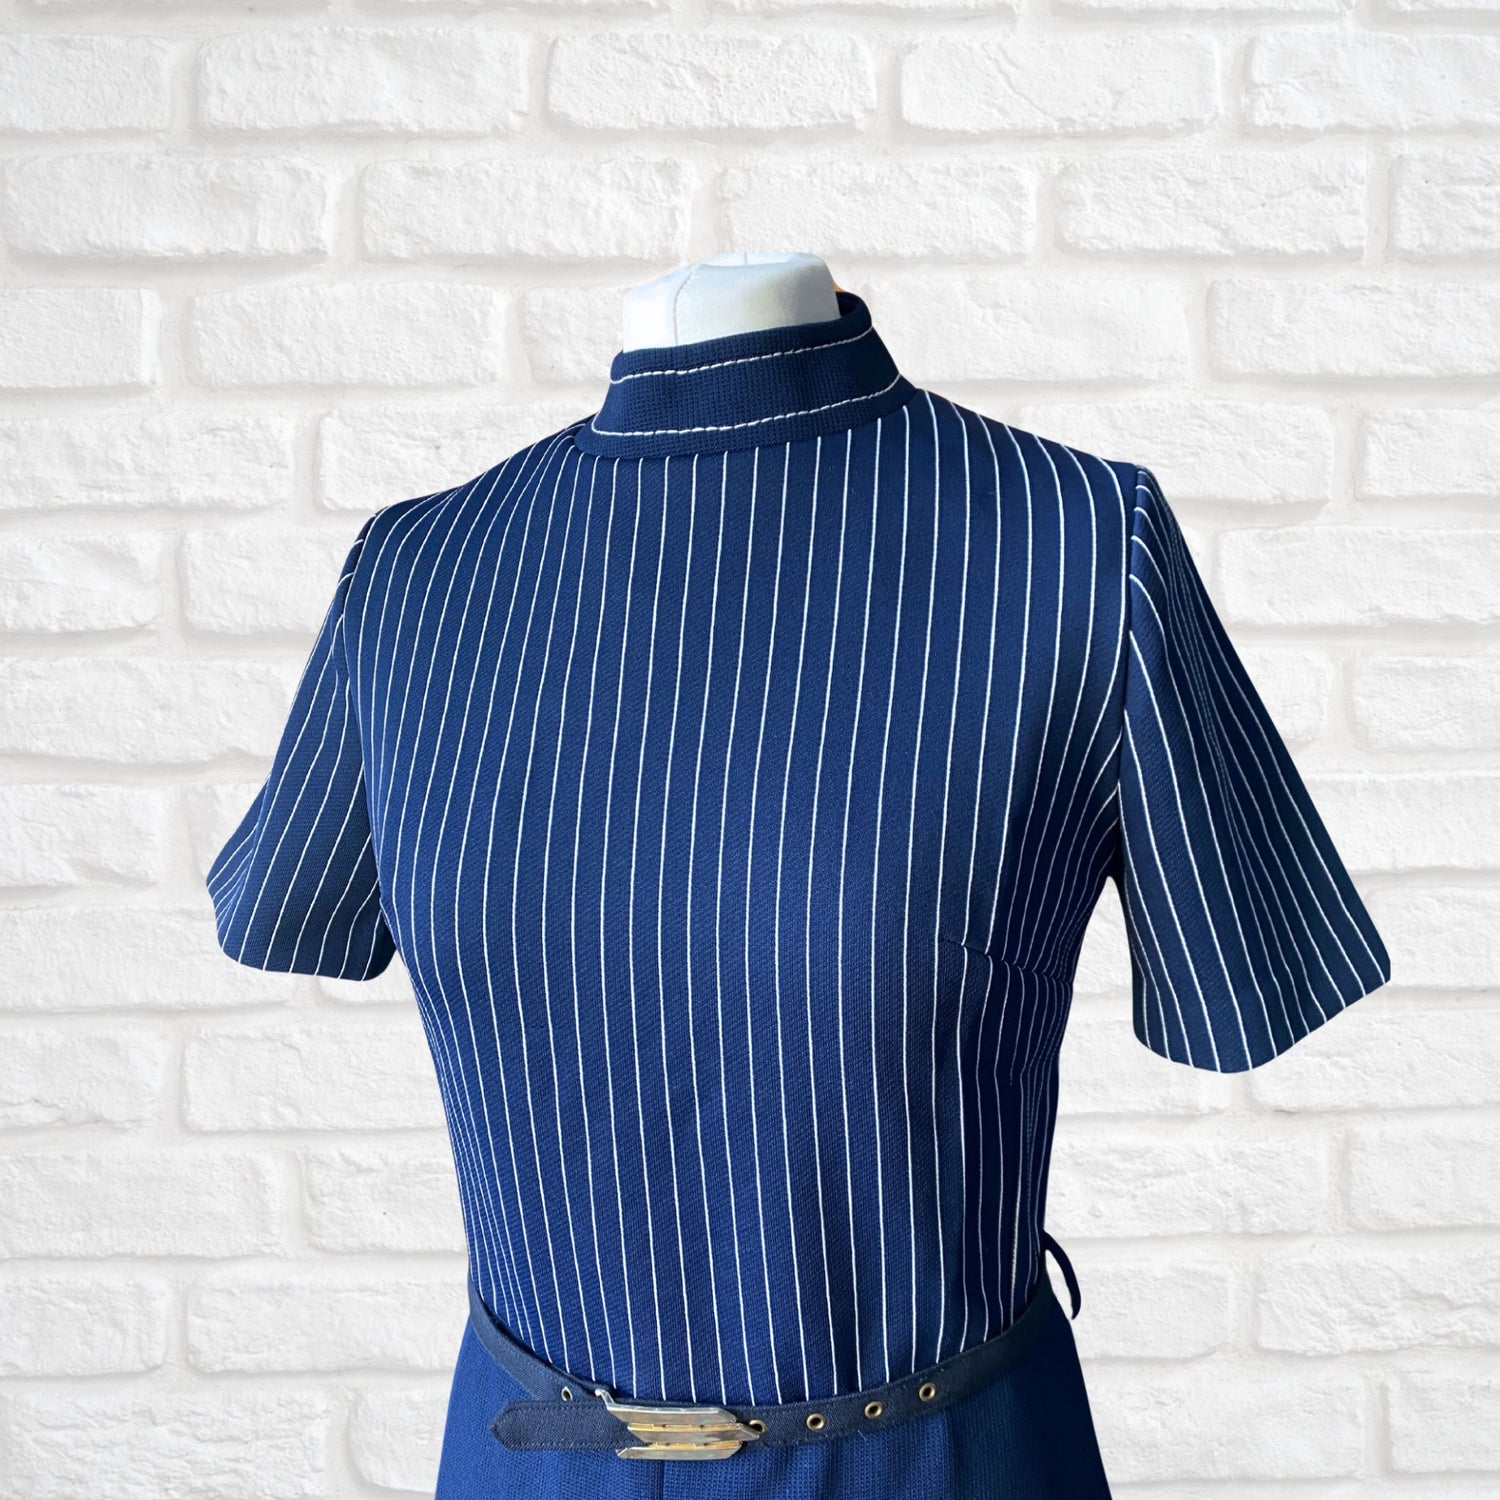 A navy blue and white striped belted 60s mod dress